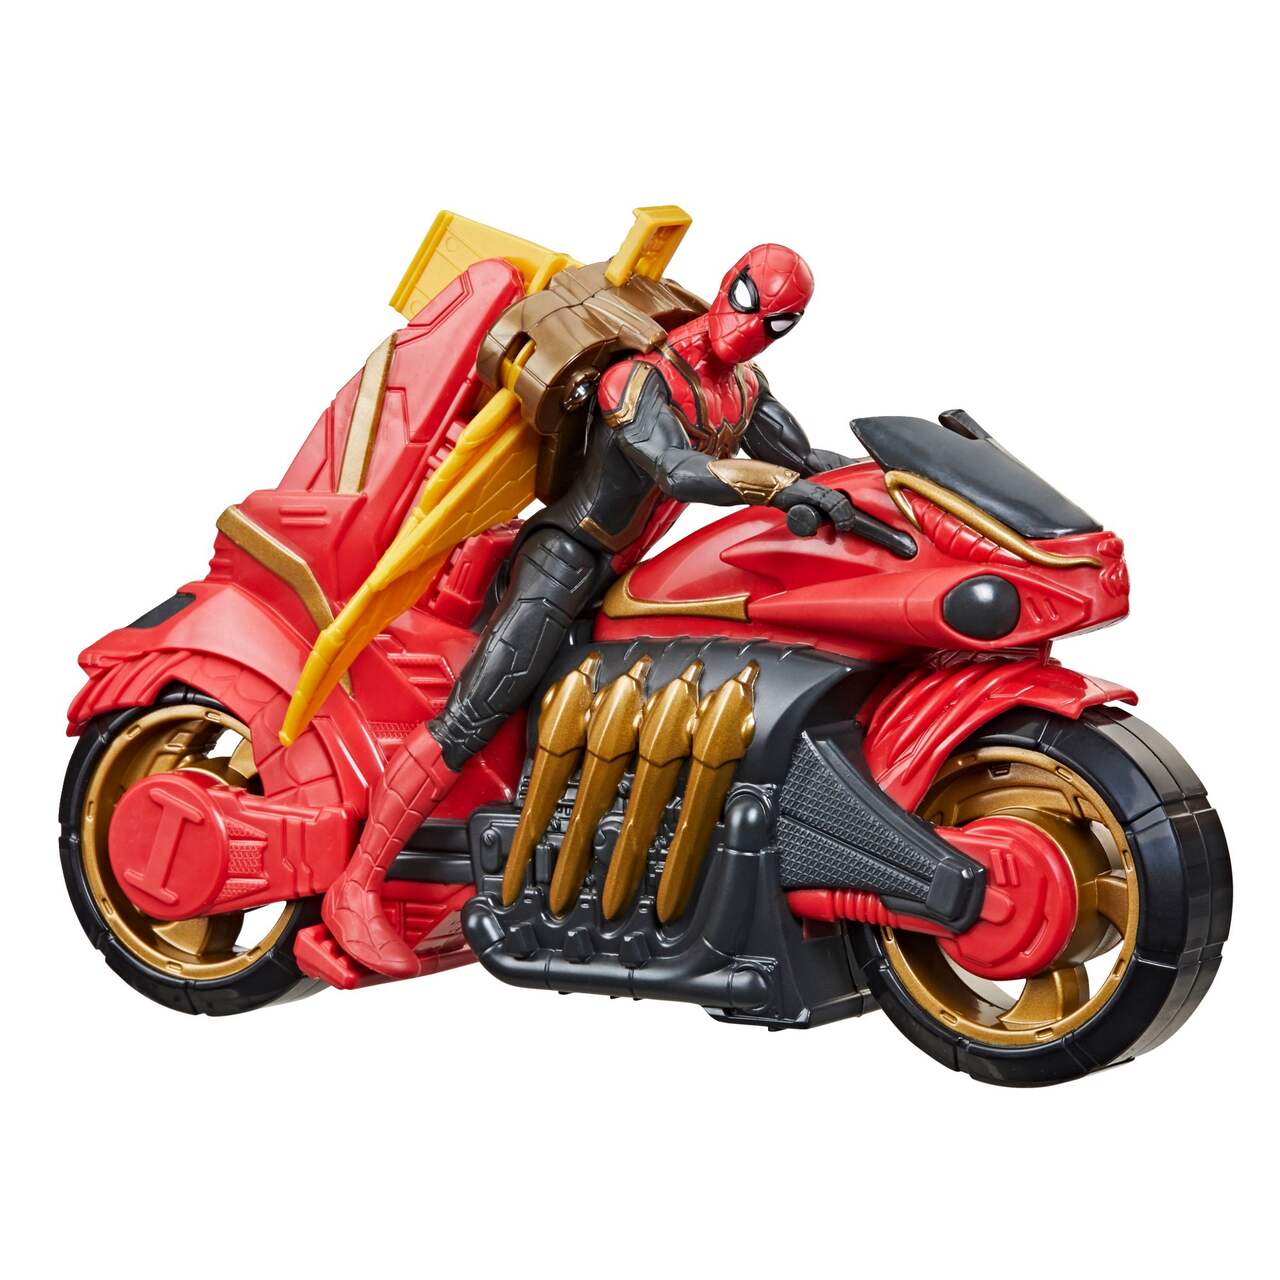 https://media-www.canadiantire.ca/product/seasonal-gardening/toys/toys-games/0508365/marvel-spiderman-movie-6-figure-and-vehicle-166aa52a-30d6-428b-bb97-89f3a175eaaa-jpgrendition.jpg?imdensity=1&imwidth=640&impolicy=mZoom